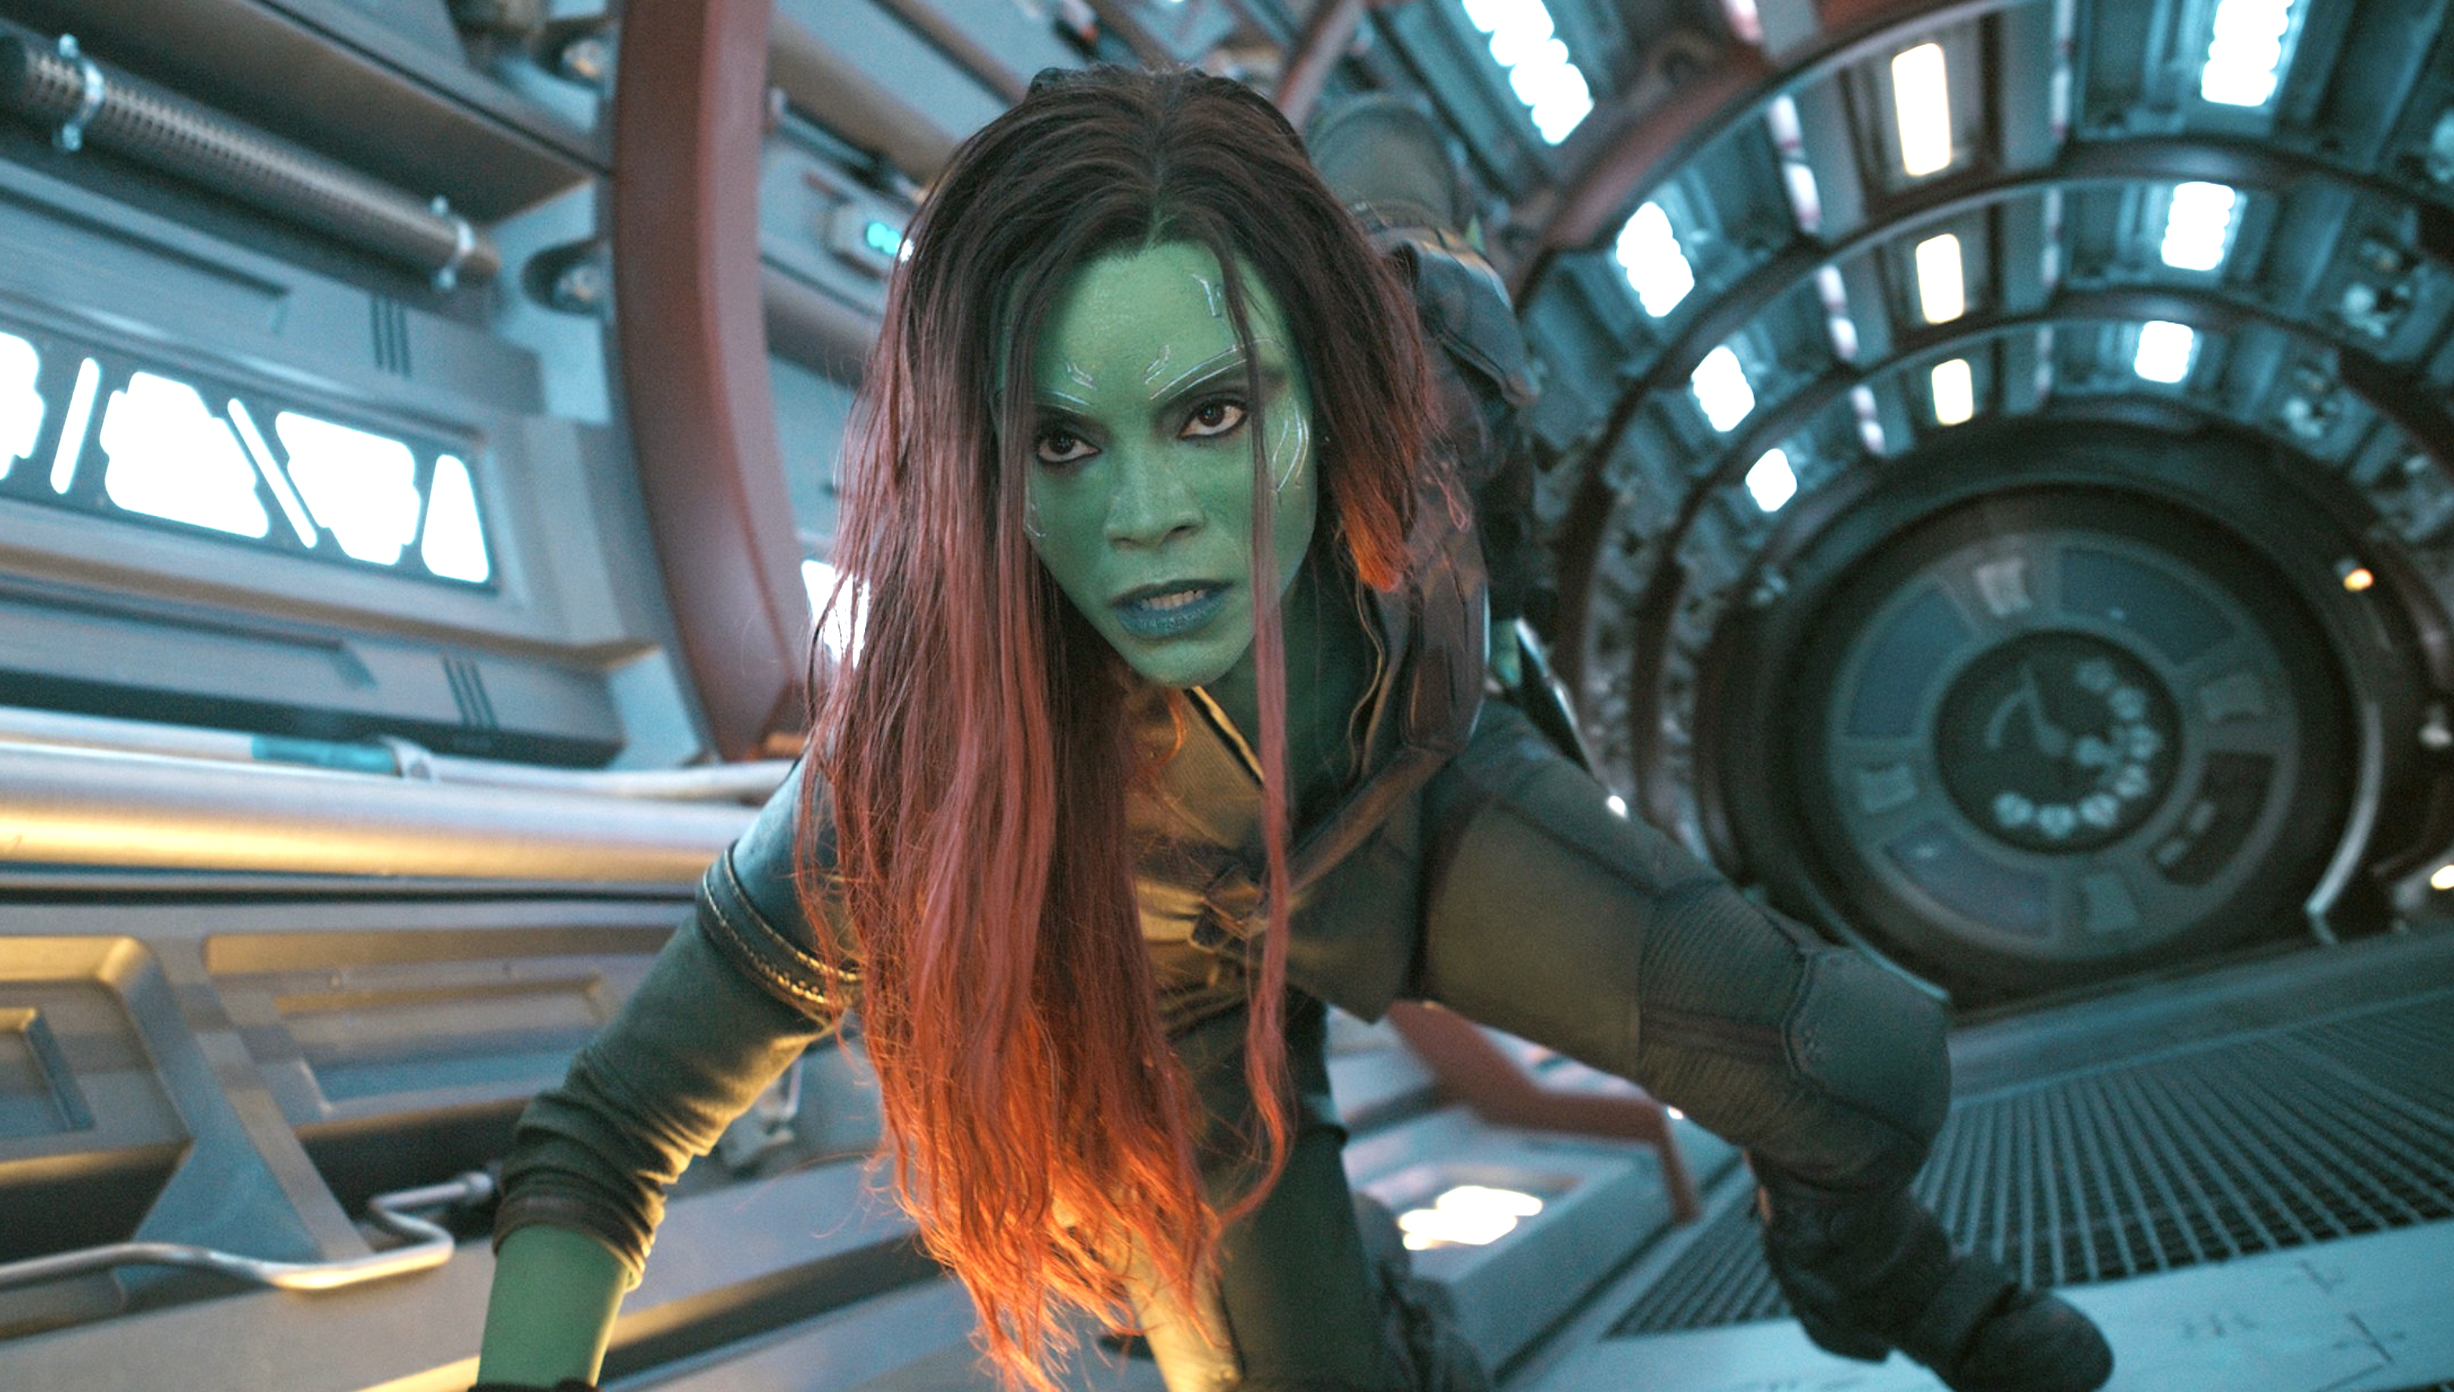 dev thakkar recommends Pictures Of Gamora From Guardians Of The Galaxy